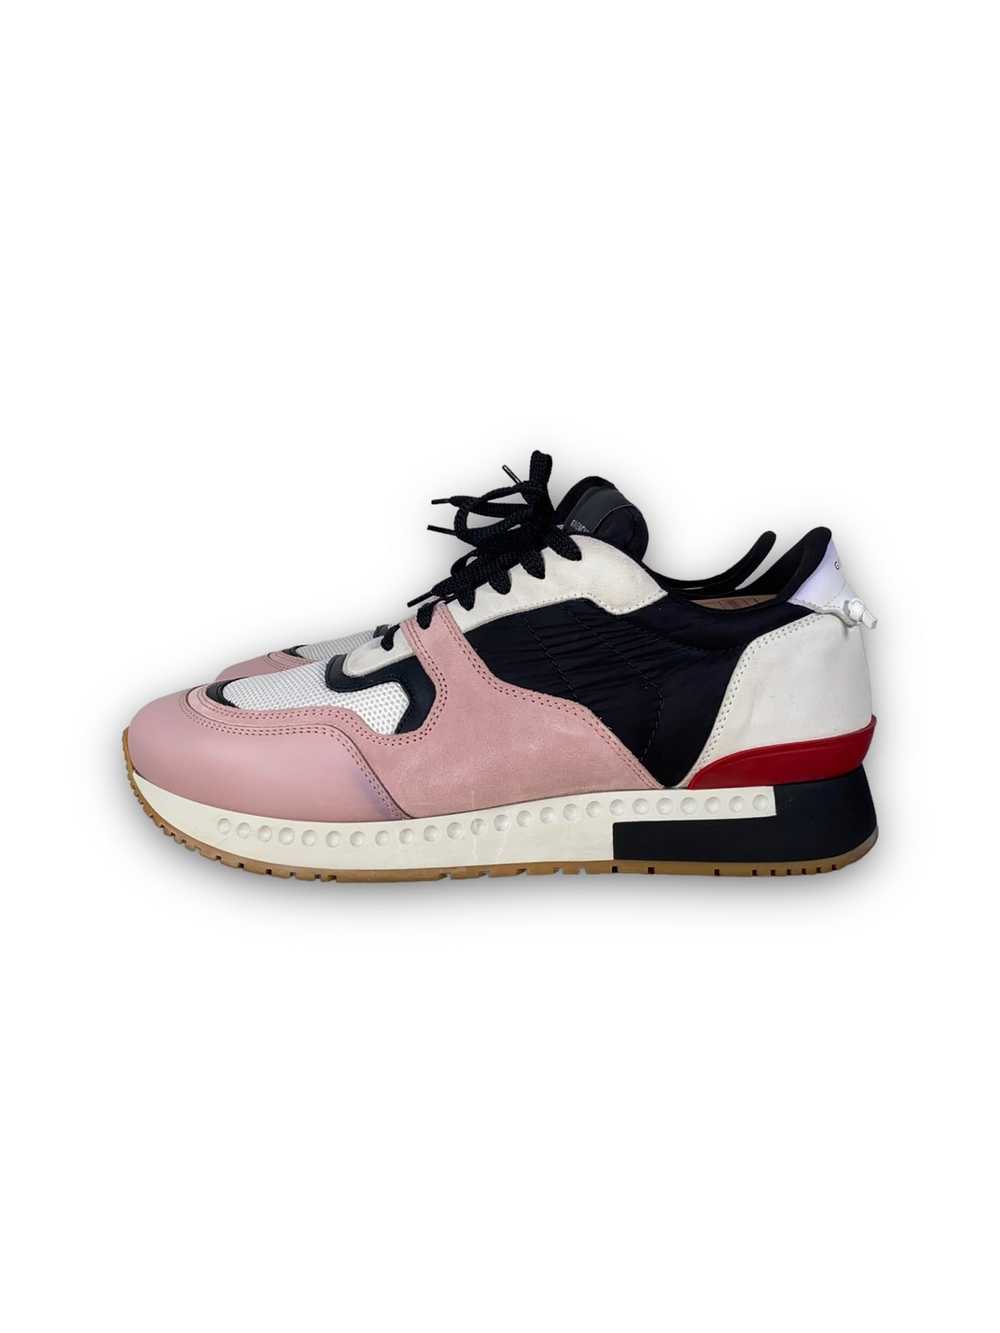 Givenchy Runner Active Trainers, size 42, Pink - image 2